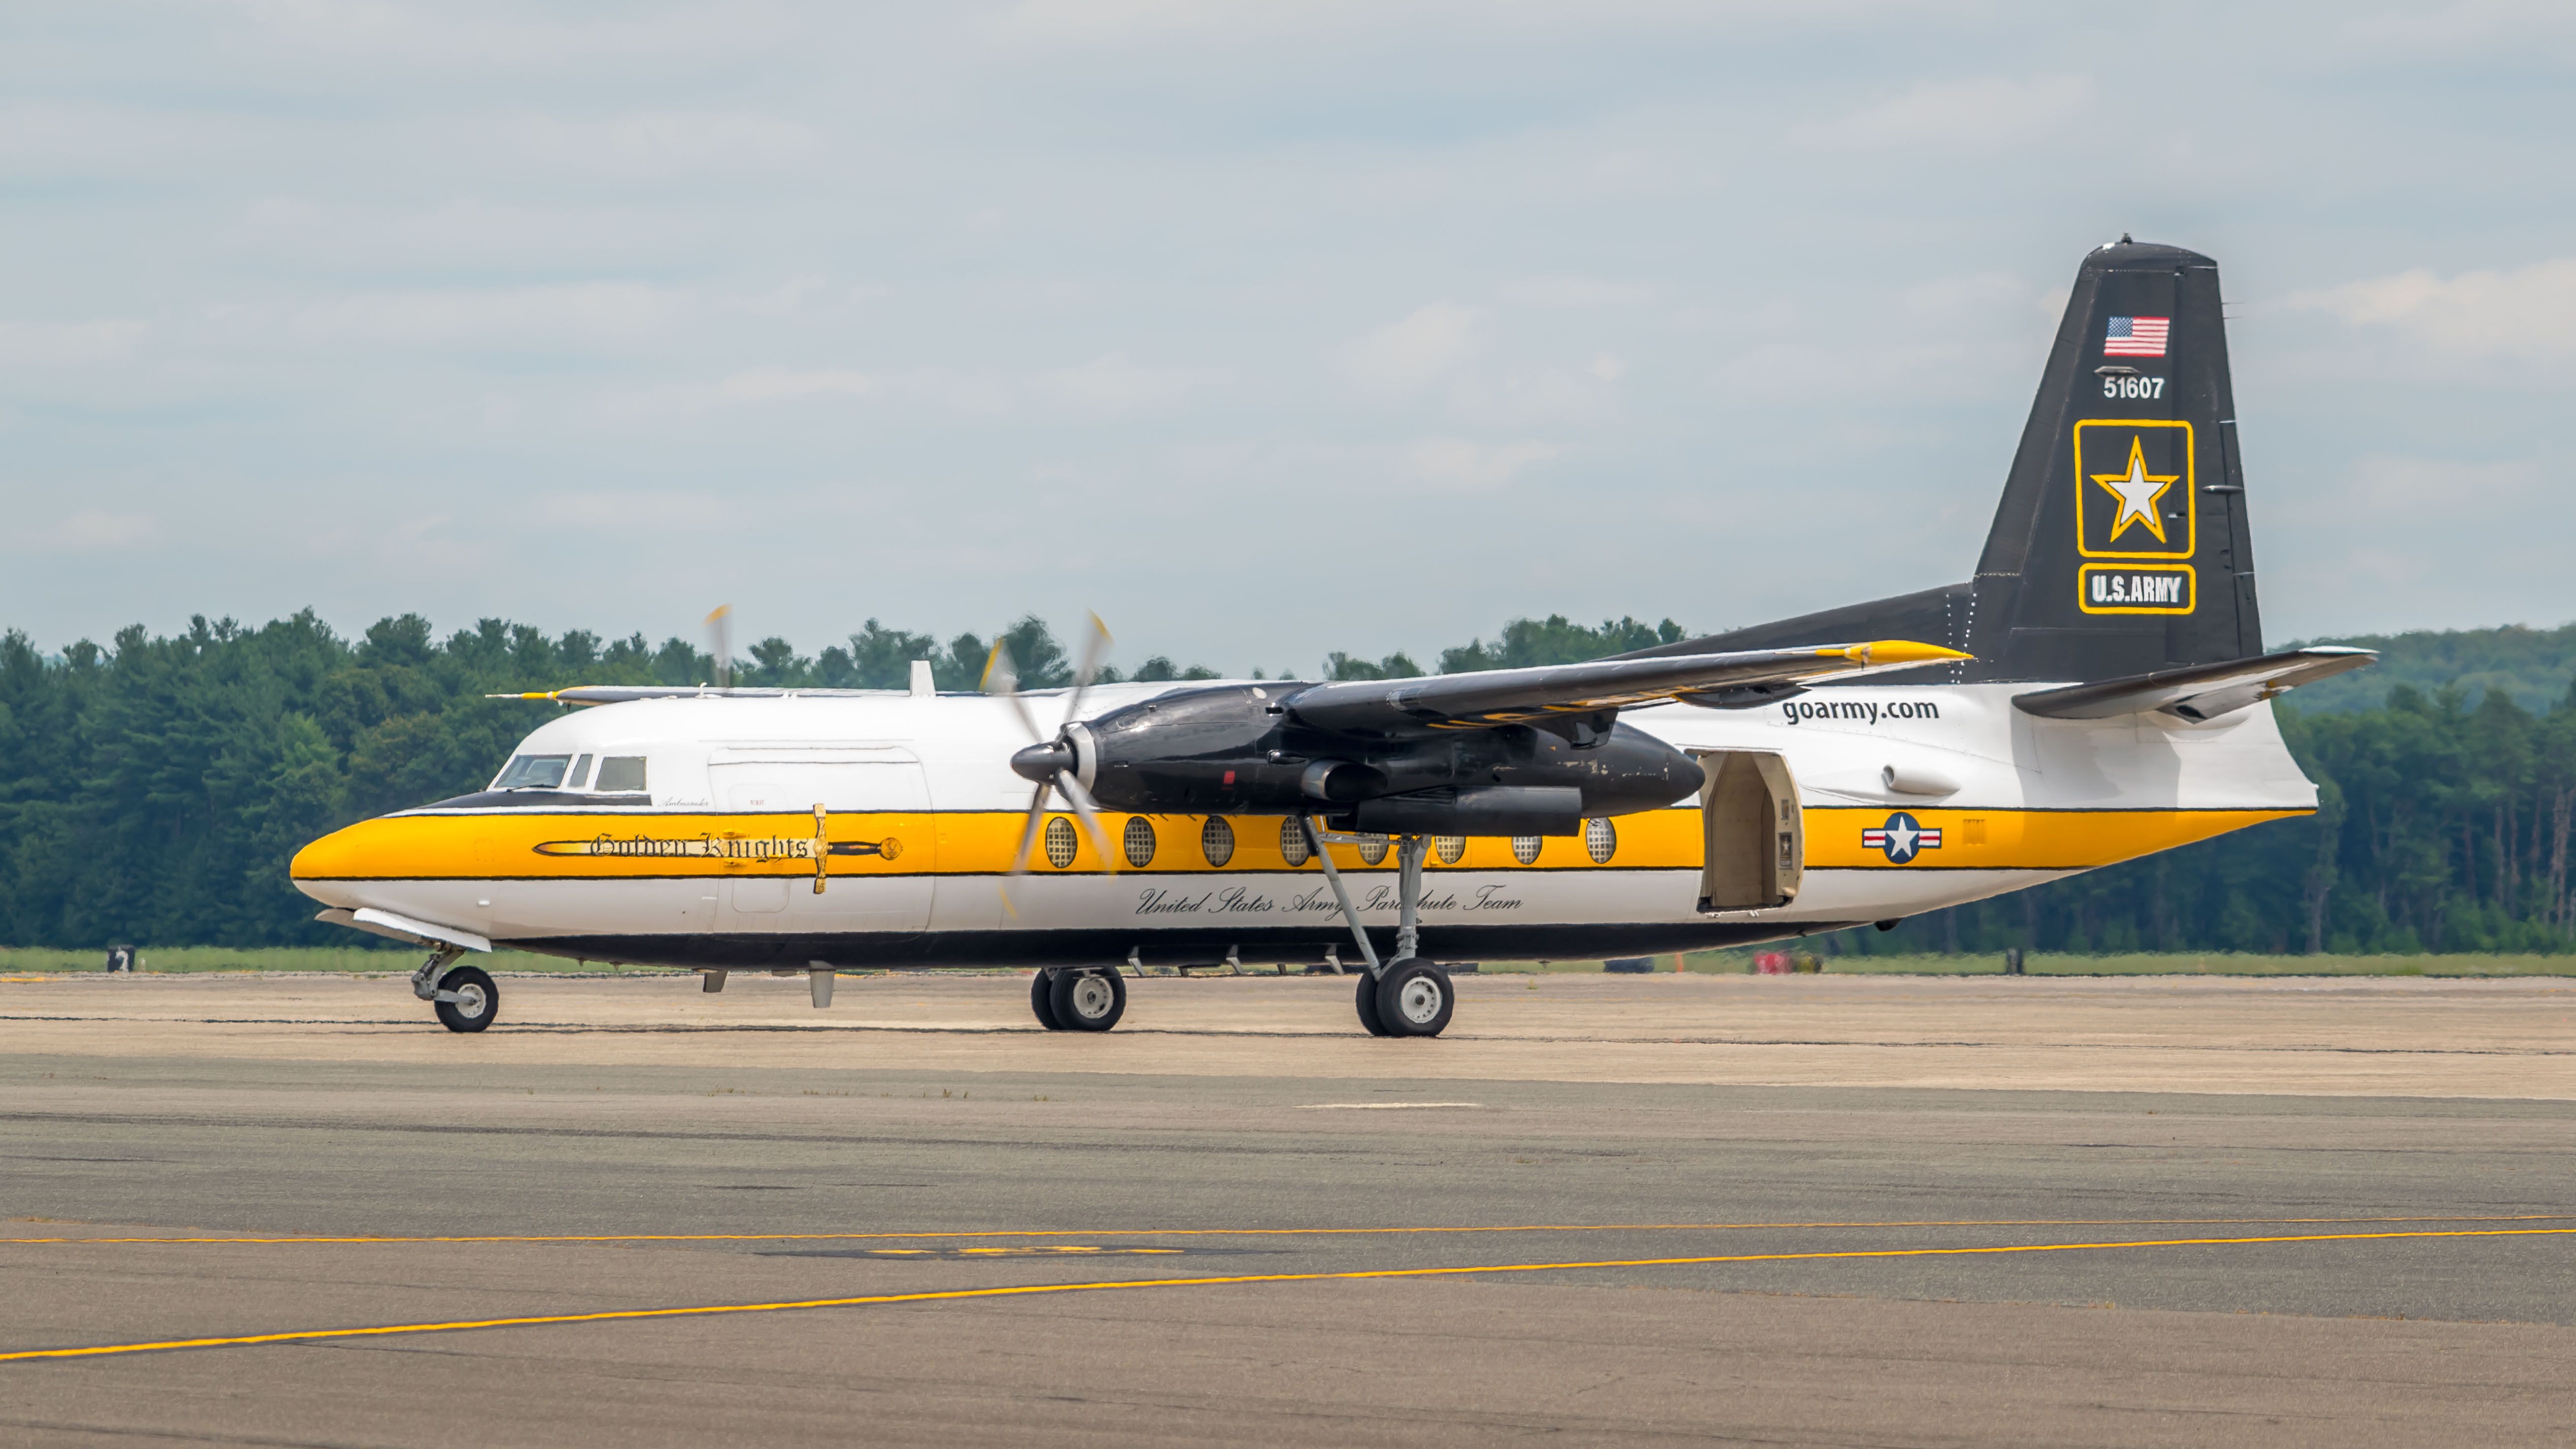 A US Army Parachute Team Fokker F27 parked at an airfield.